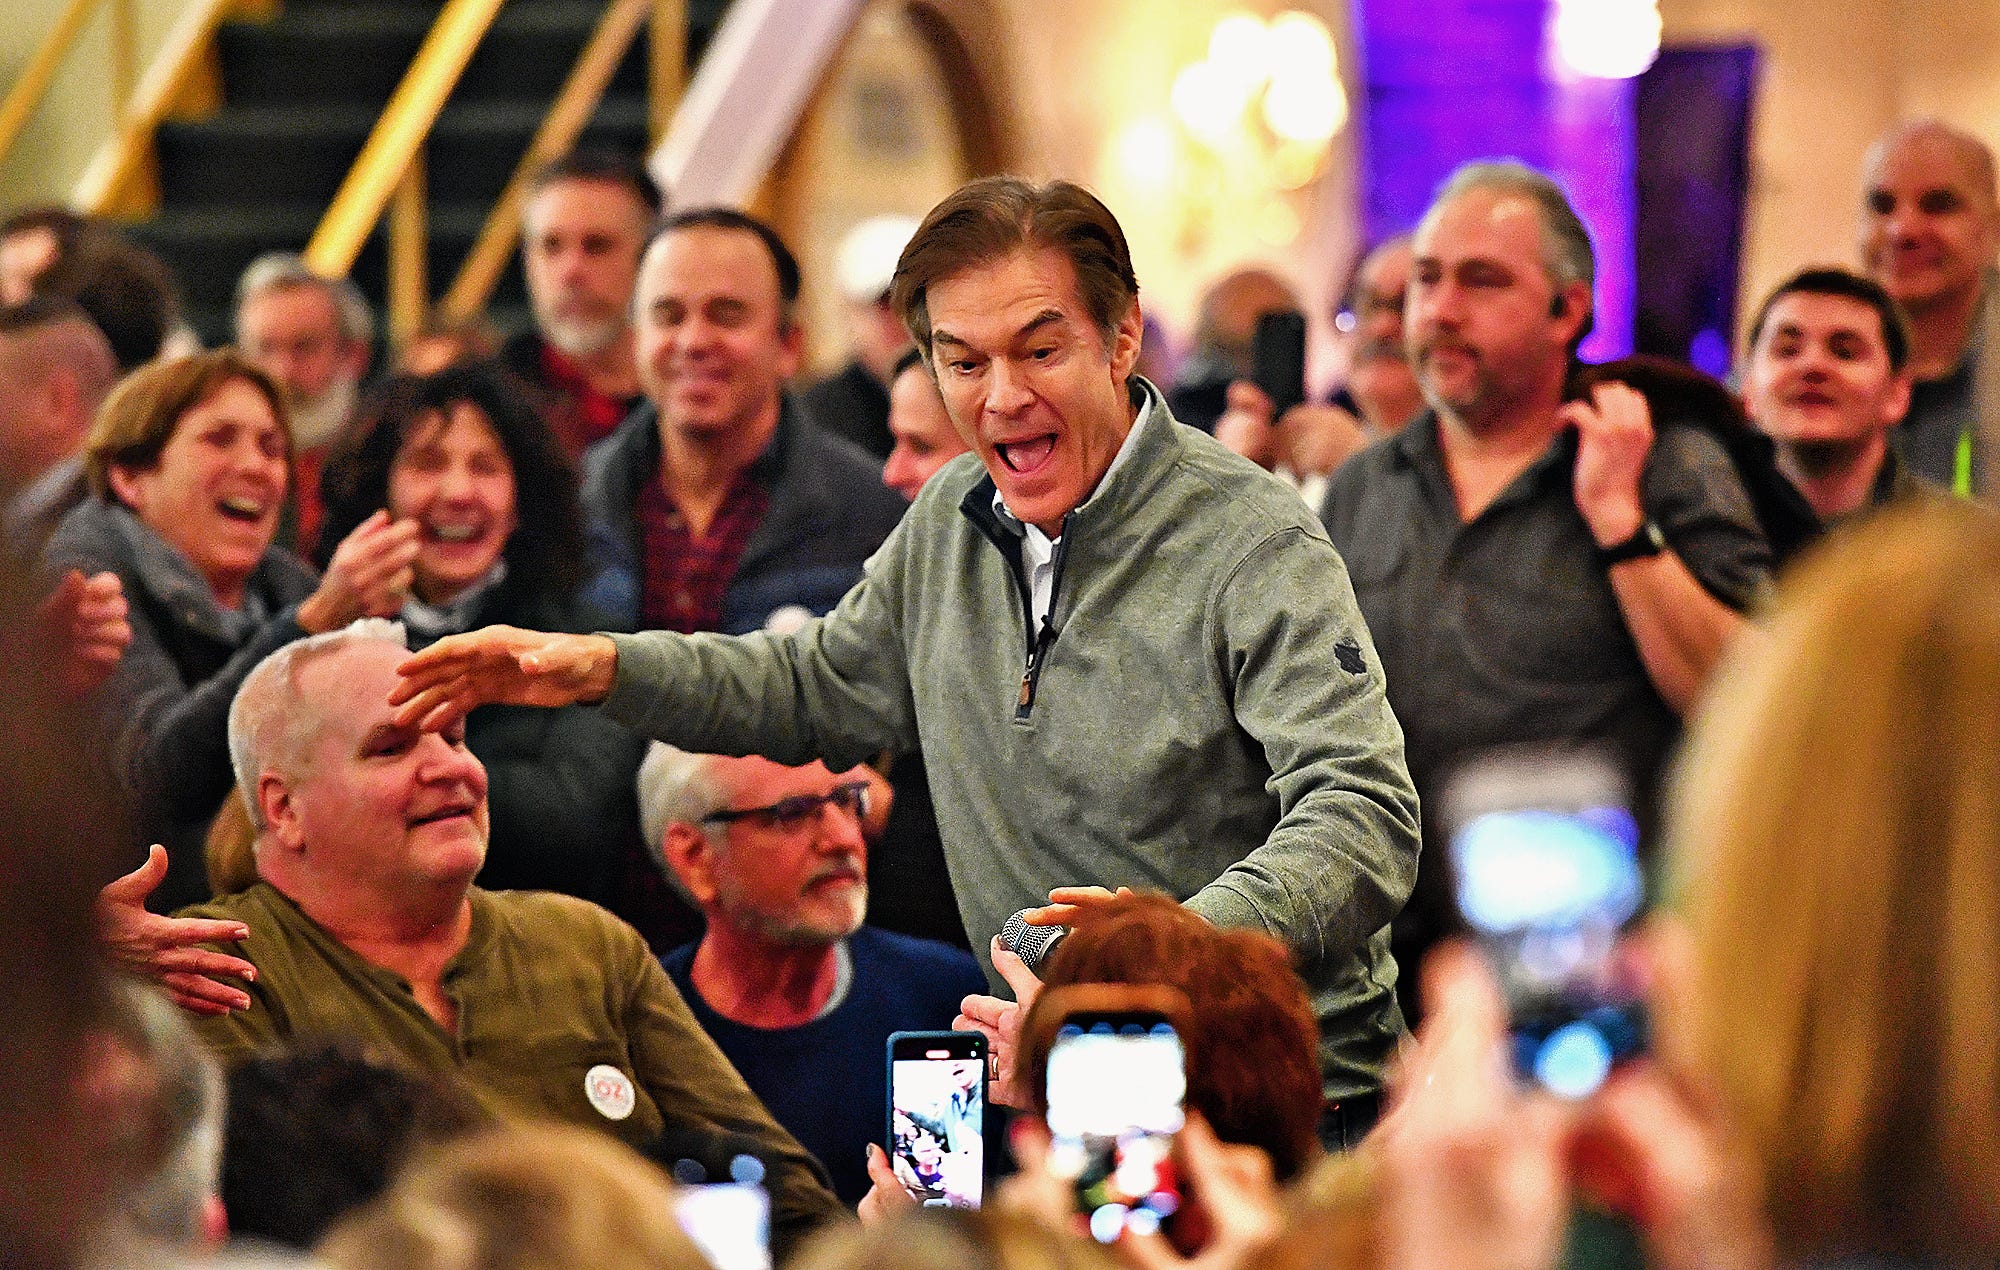 Dr. Mehmet Oz makes his entrance during the Doctor Oz for Senate campaign tour stop at Wisehaven Event Center in Windsor Township, Saturday, Feb. 5, 2022. Dawn J. Sagert photo